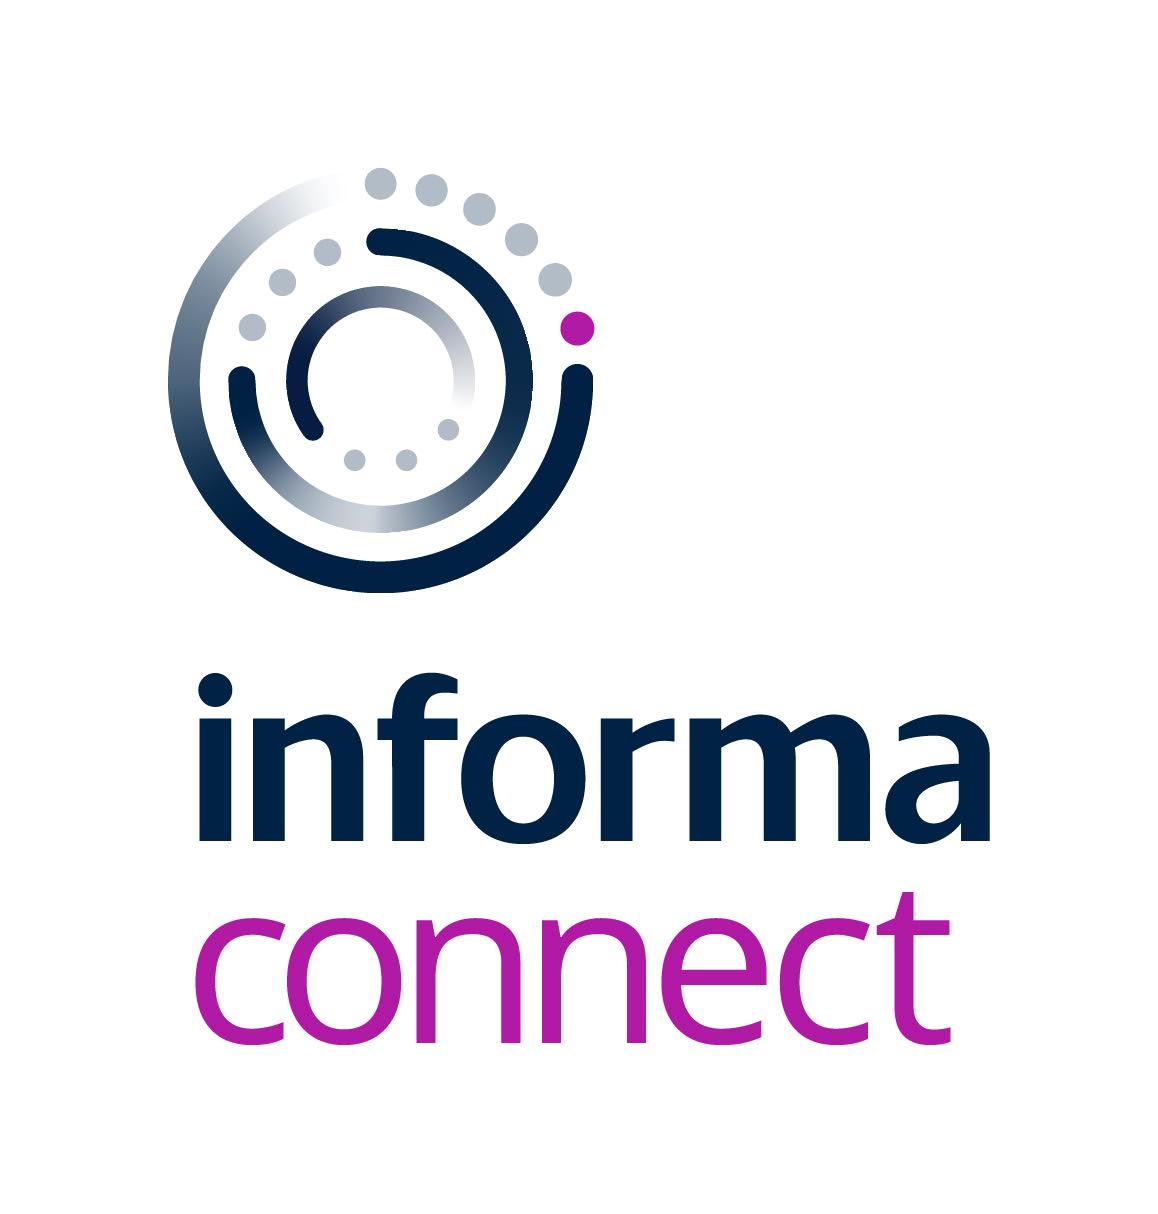 More about Informa Connect Middle East